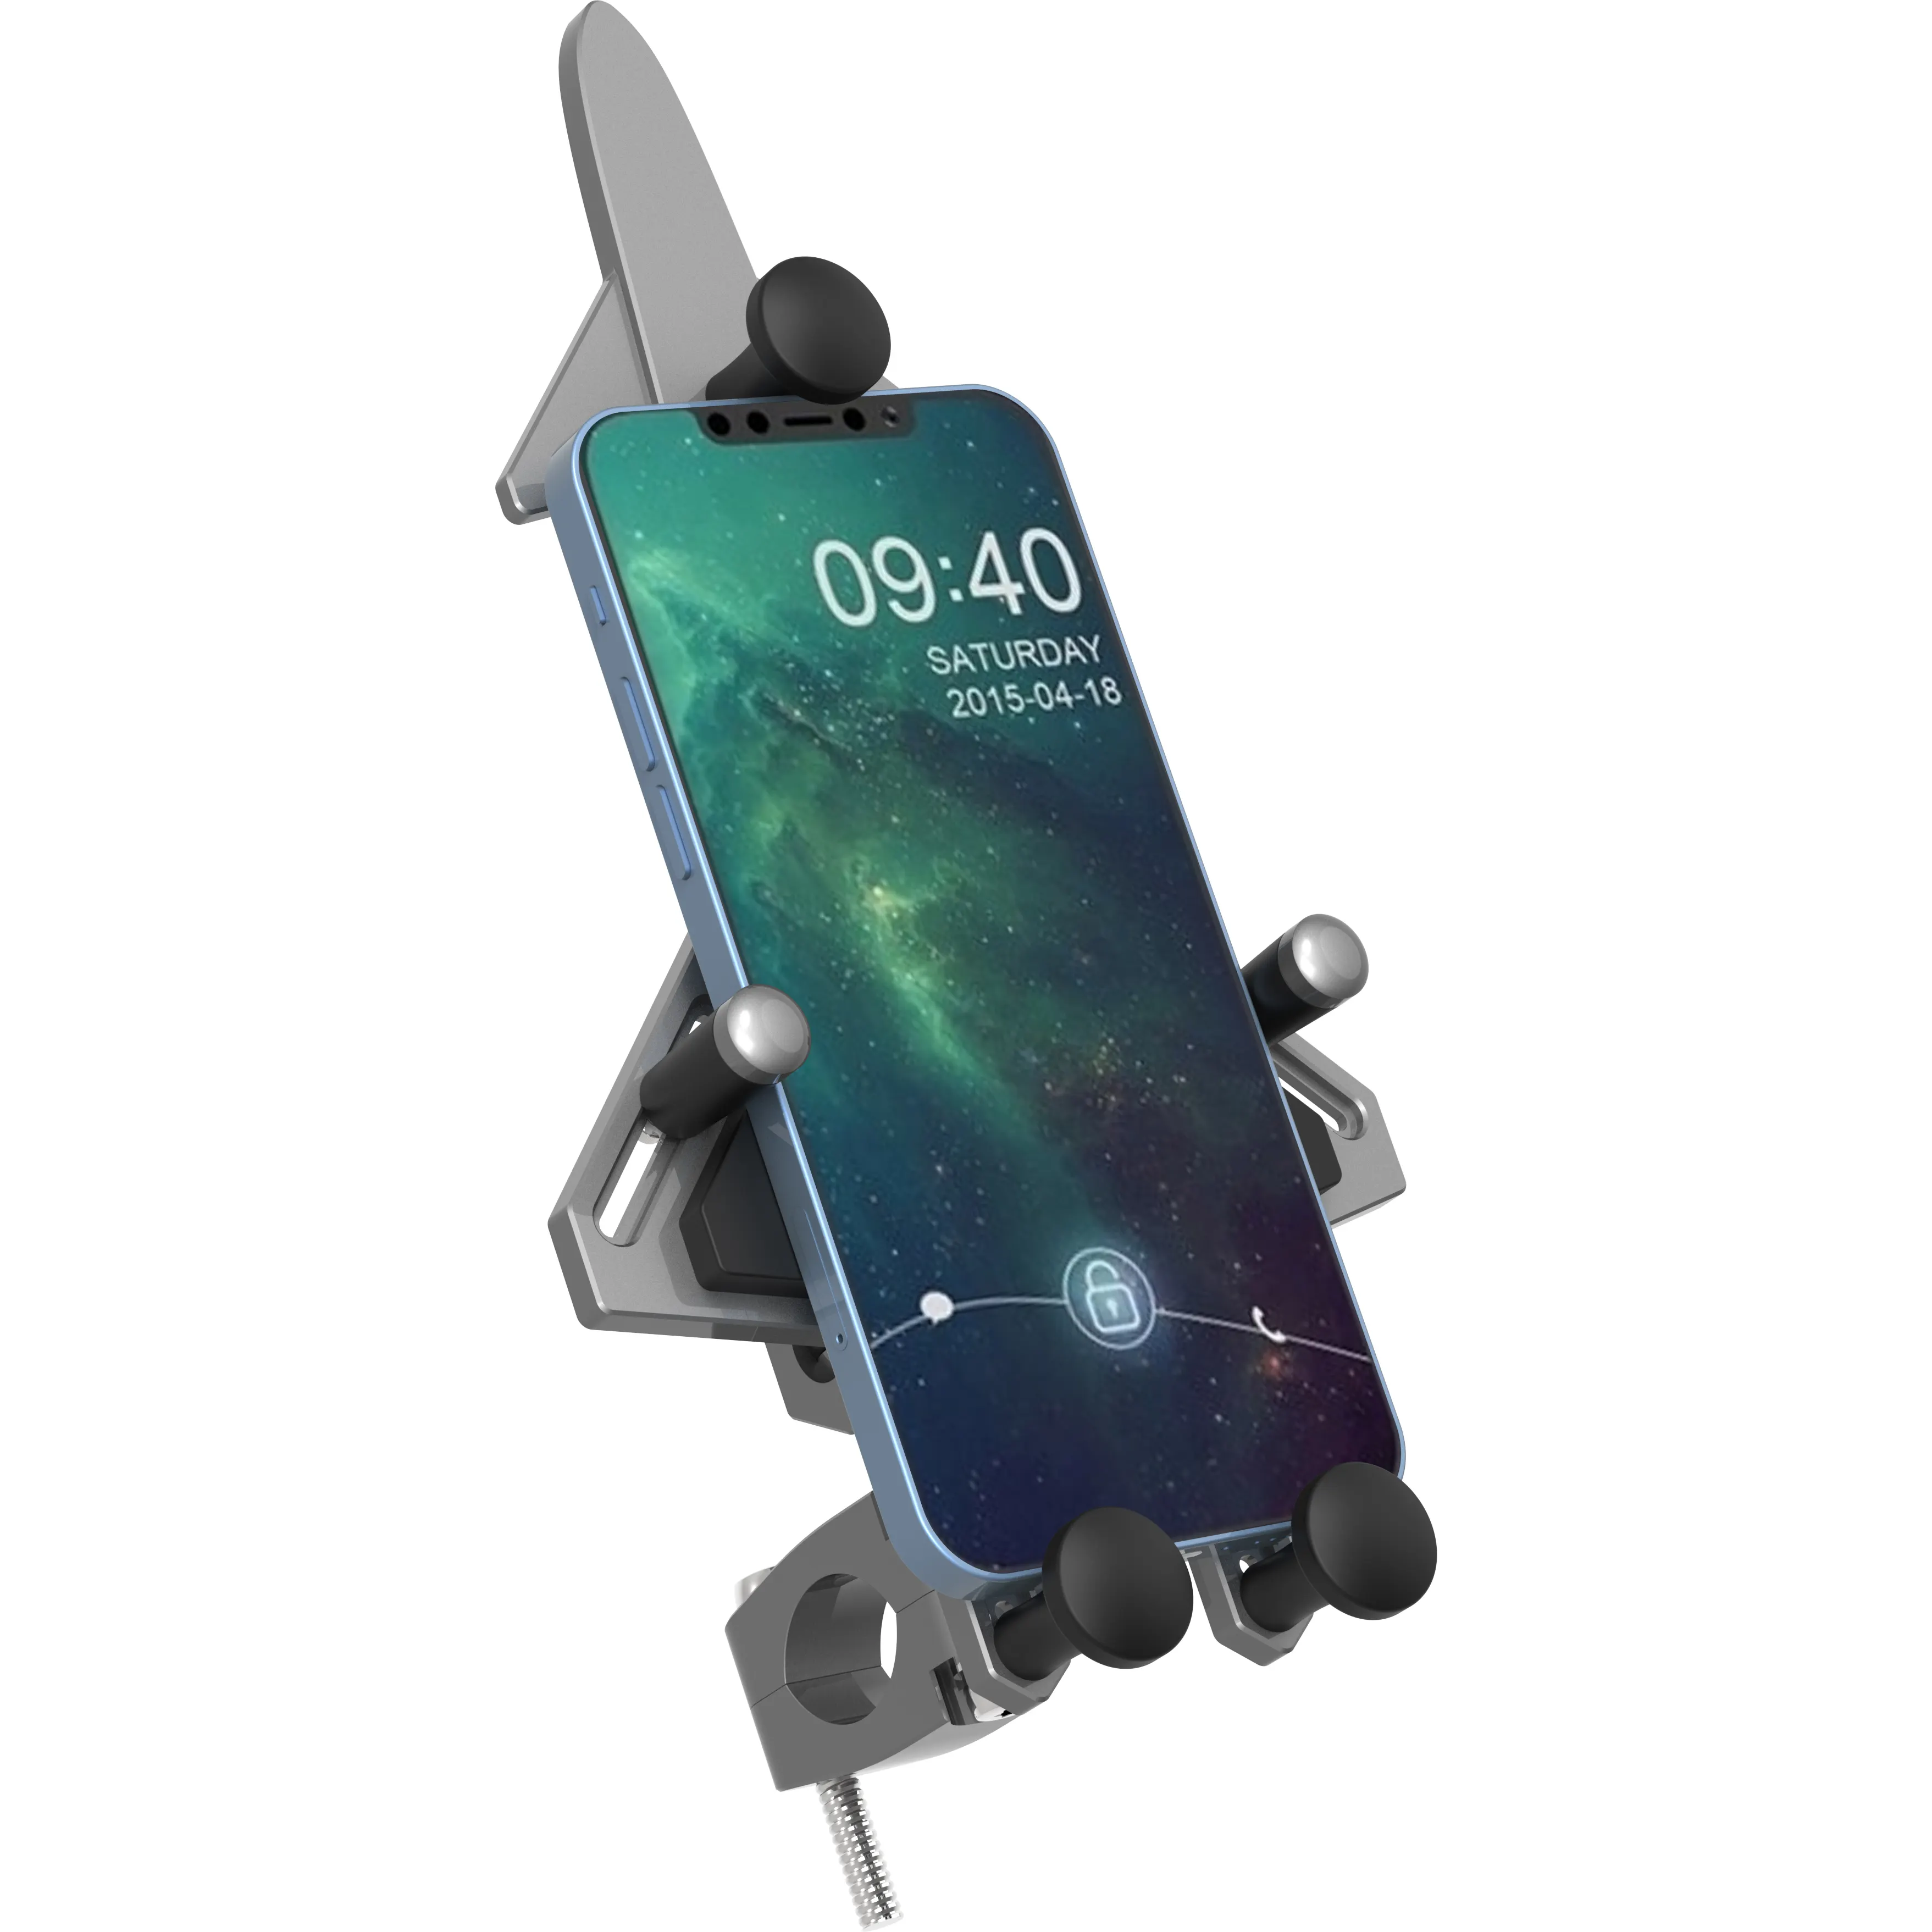 Standard sizes Aluminum Mobile Stand Bicycle For Outdoor Riding Motorcycle mobile phone holder